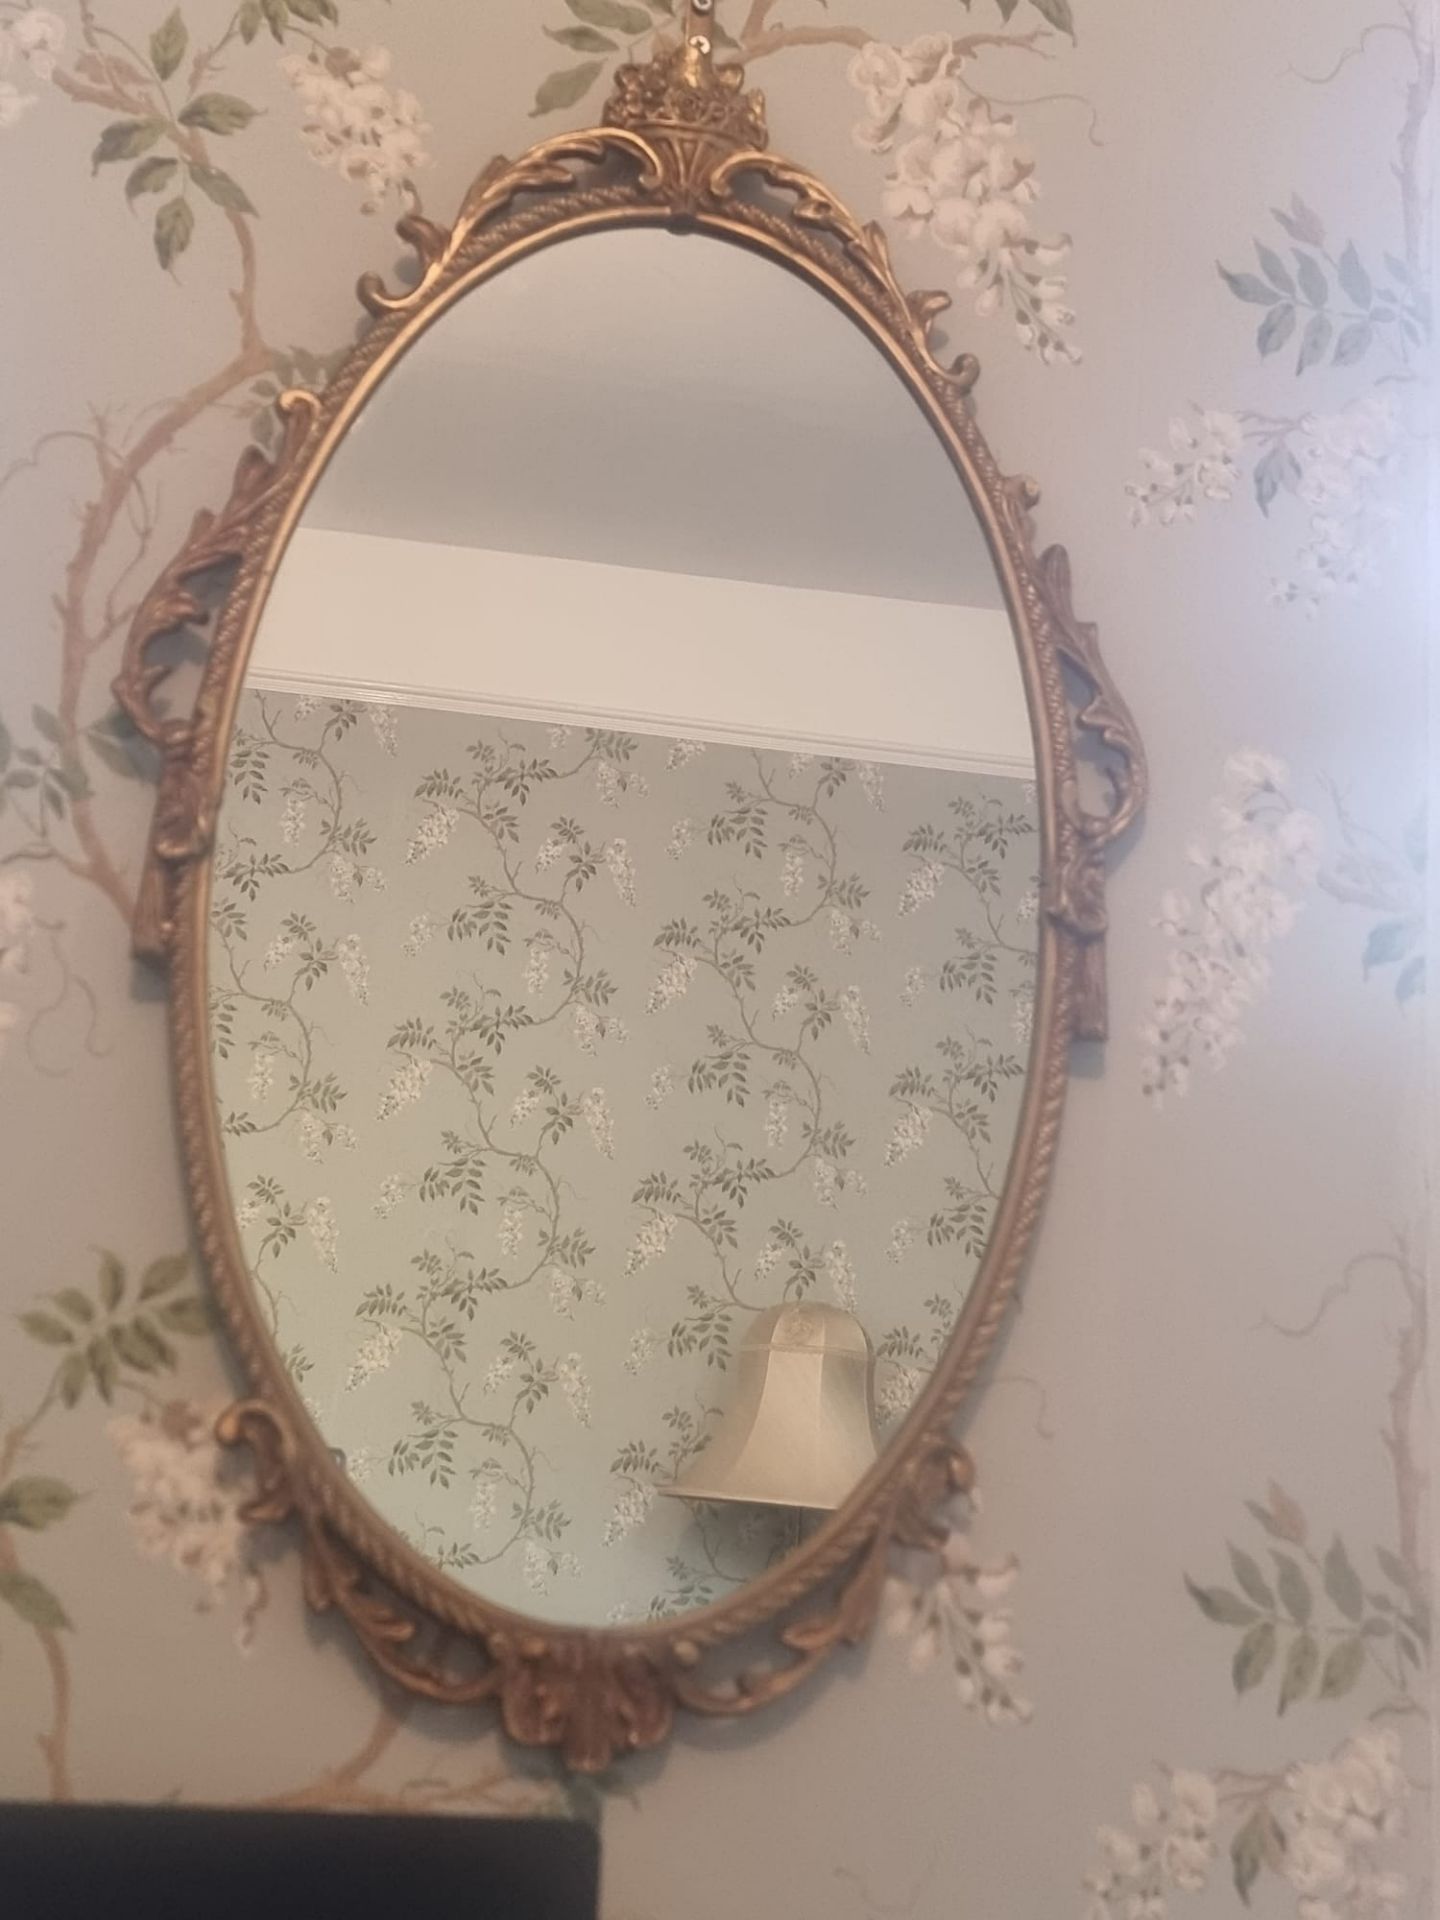 Victorian Brass Oval Framed Accent Mirror A Fine Cast Mirror With Decorative Acanthus Leaf And - Image 4 of 5